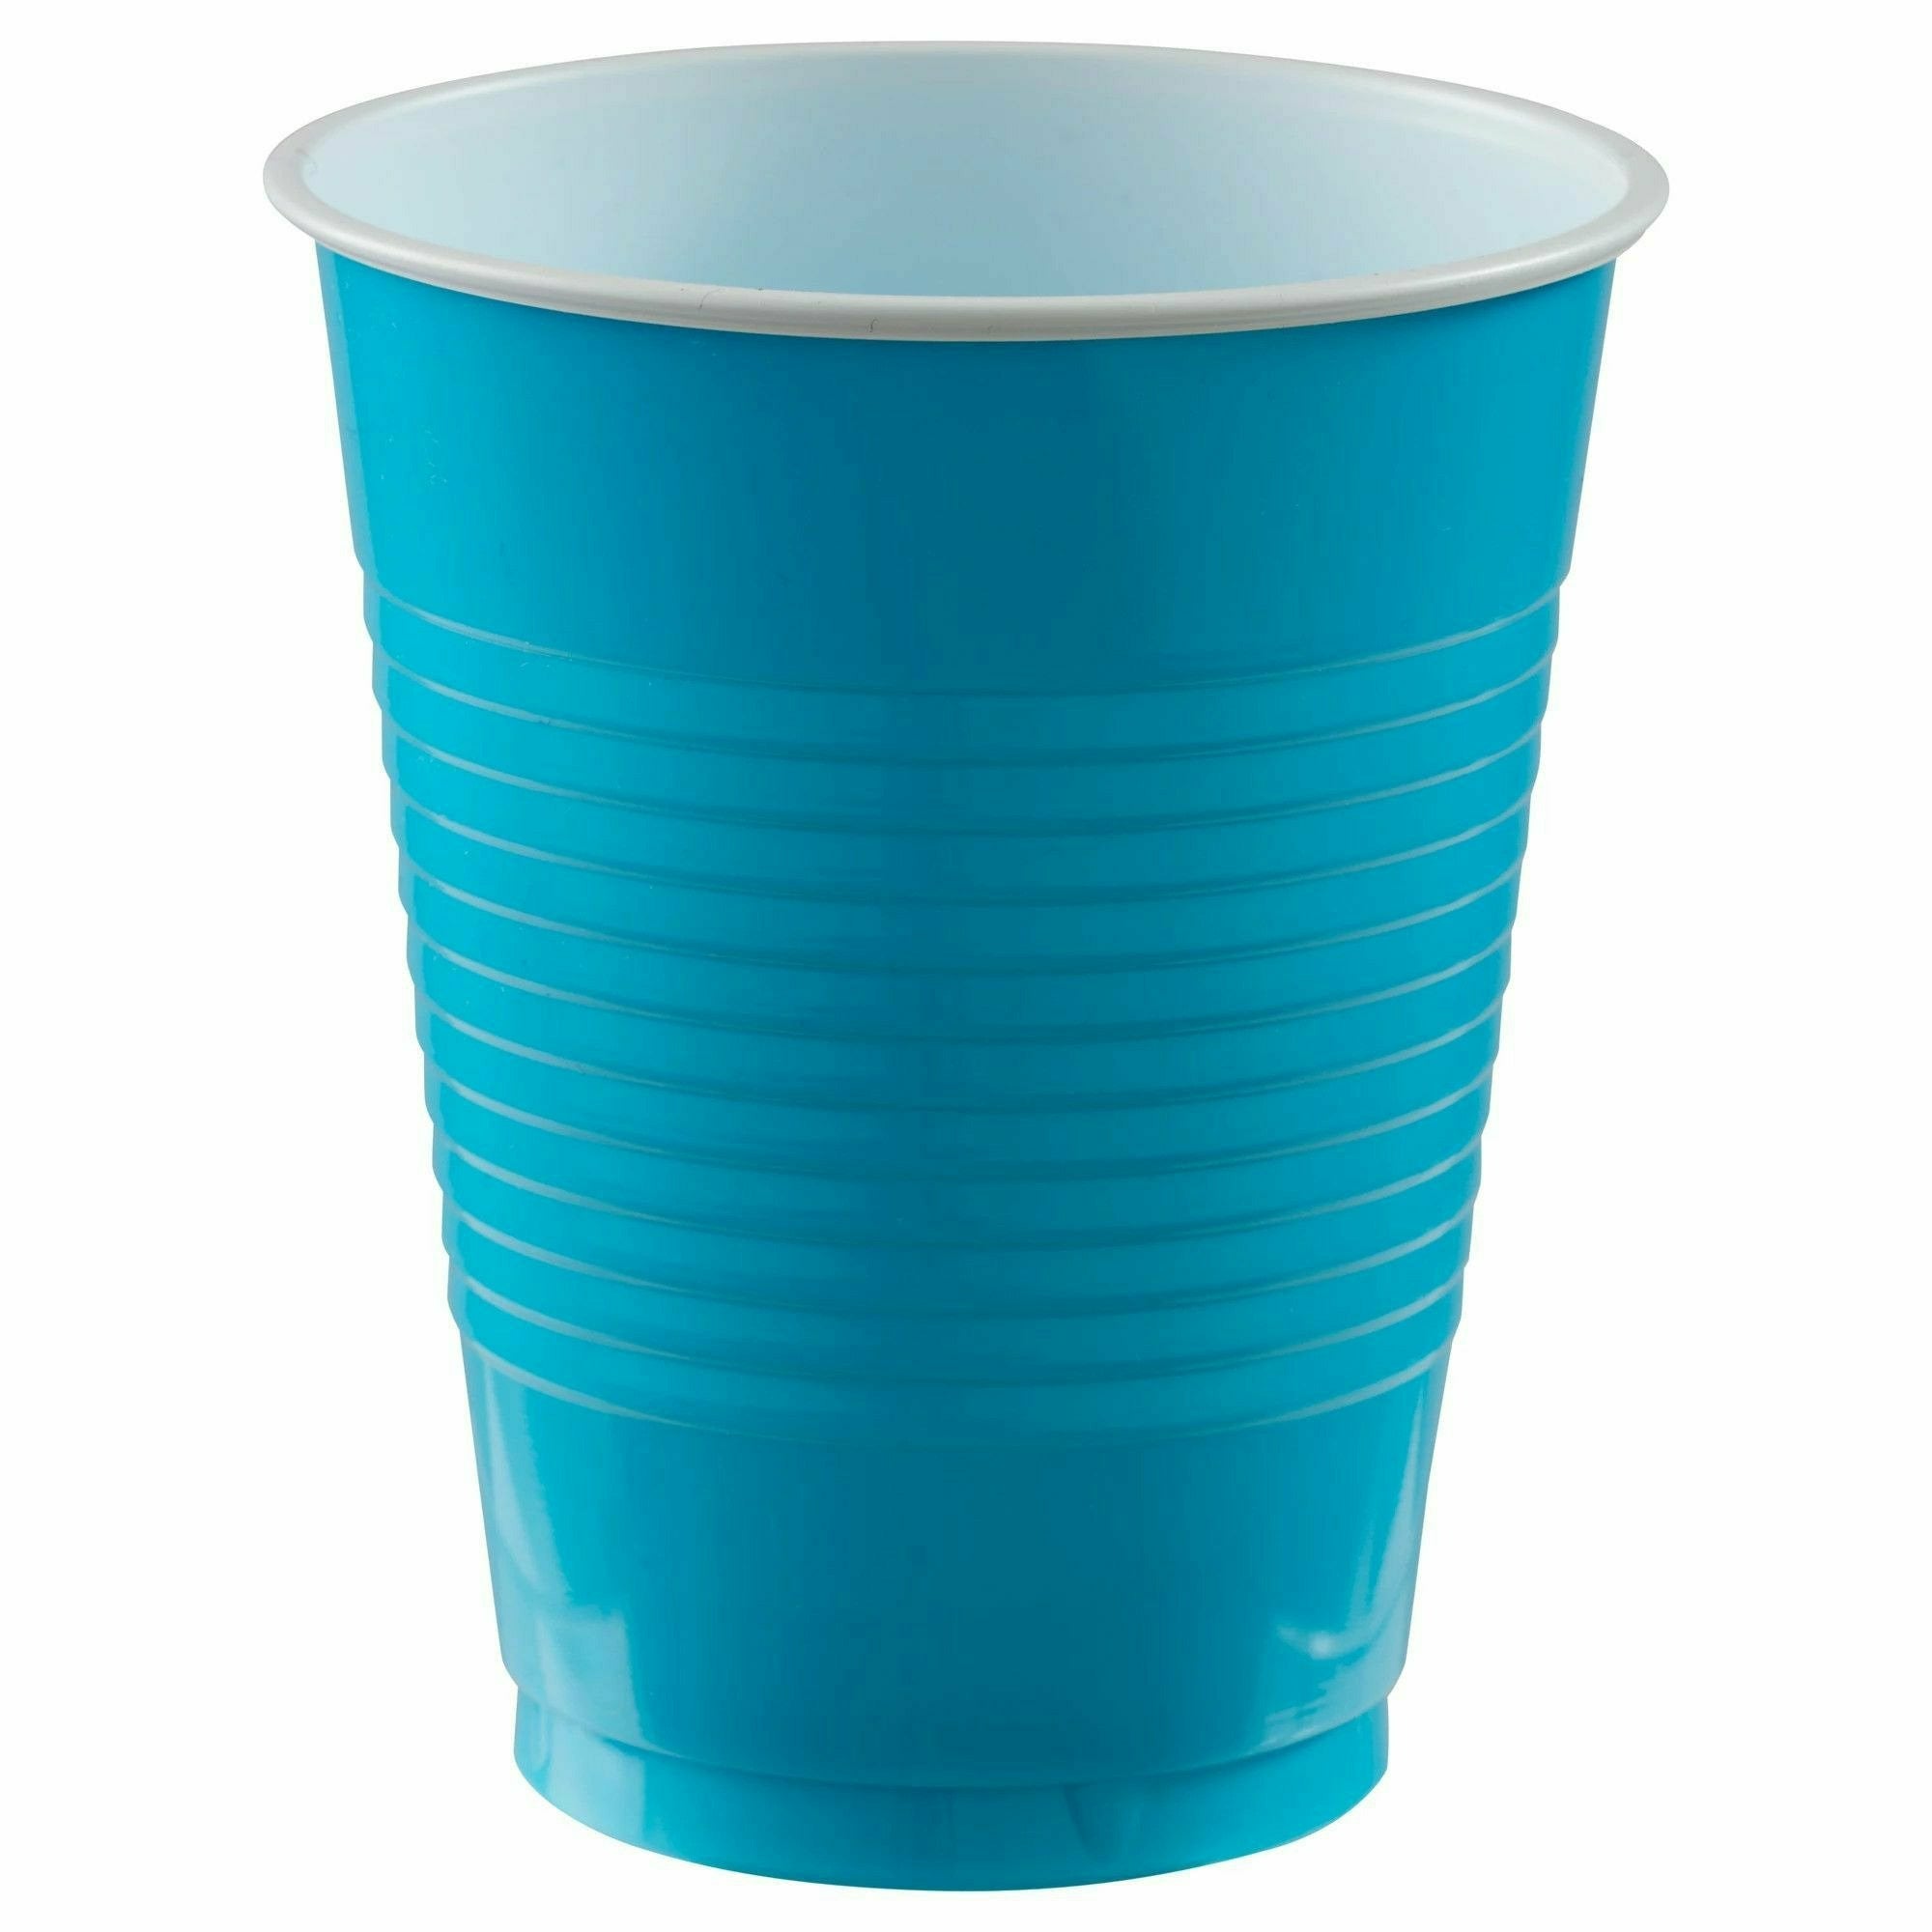 Caribbean - 18 oz. Plastic Cups, 20 Ct. - Ultimate Party Super Stores